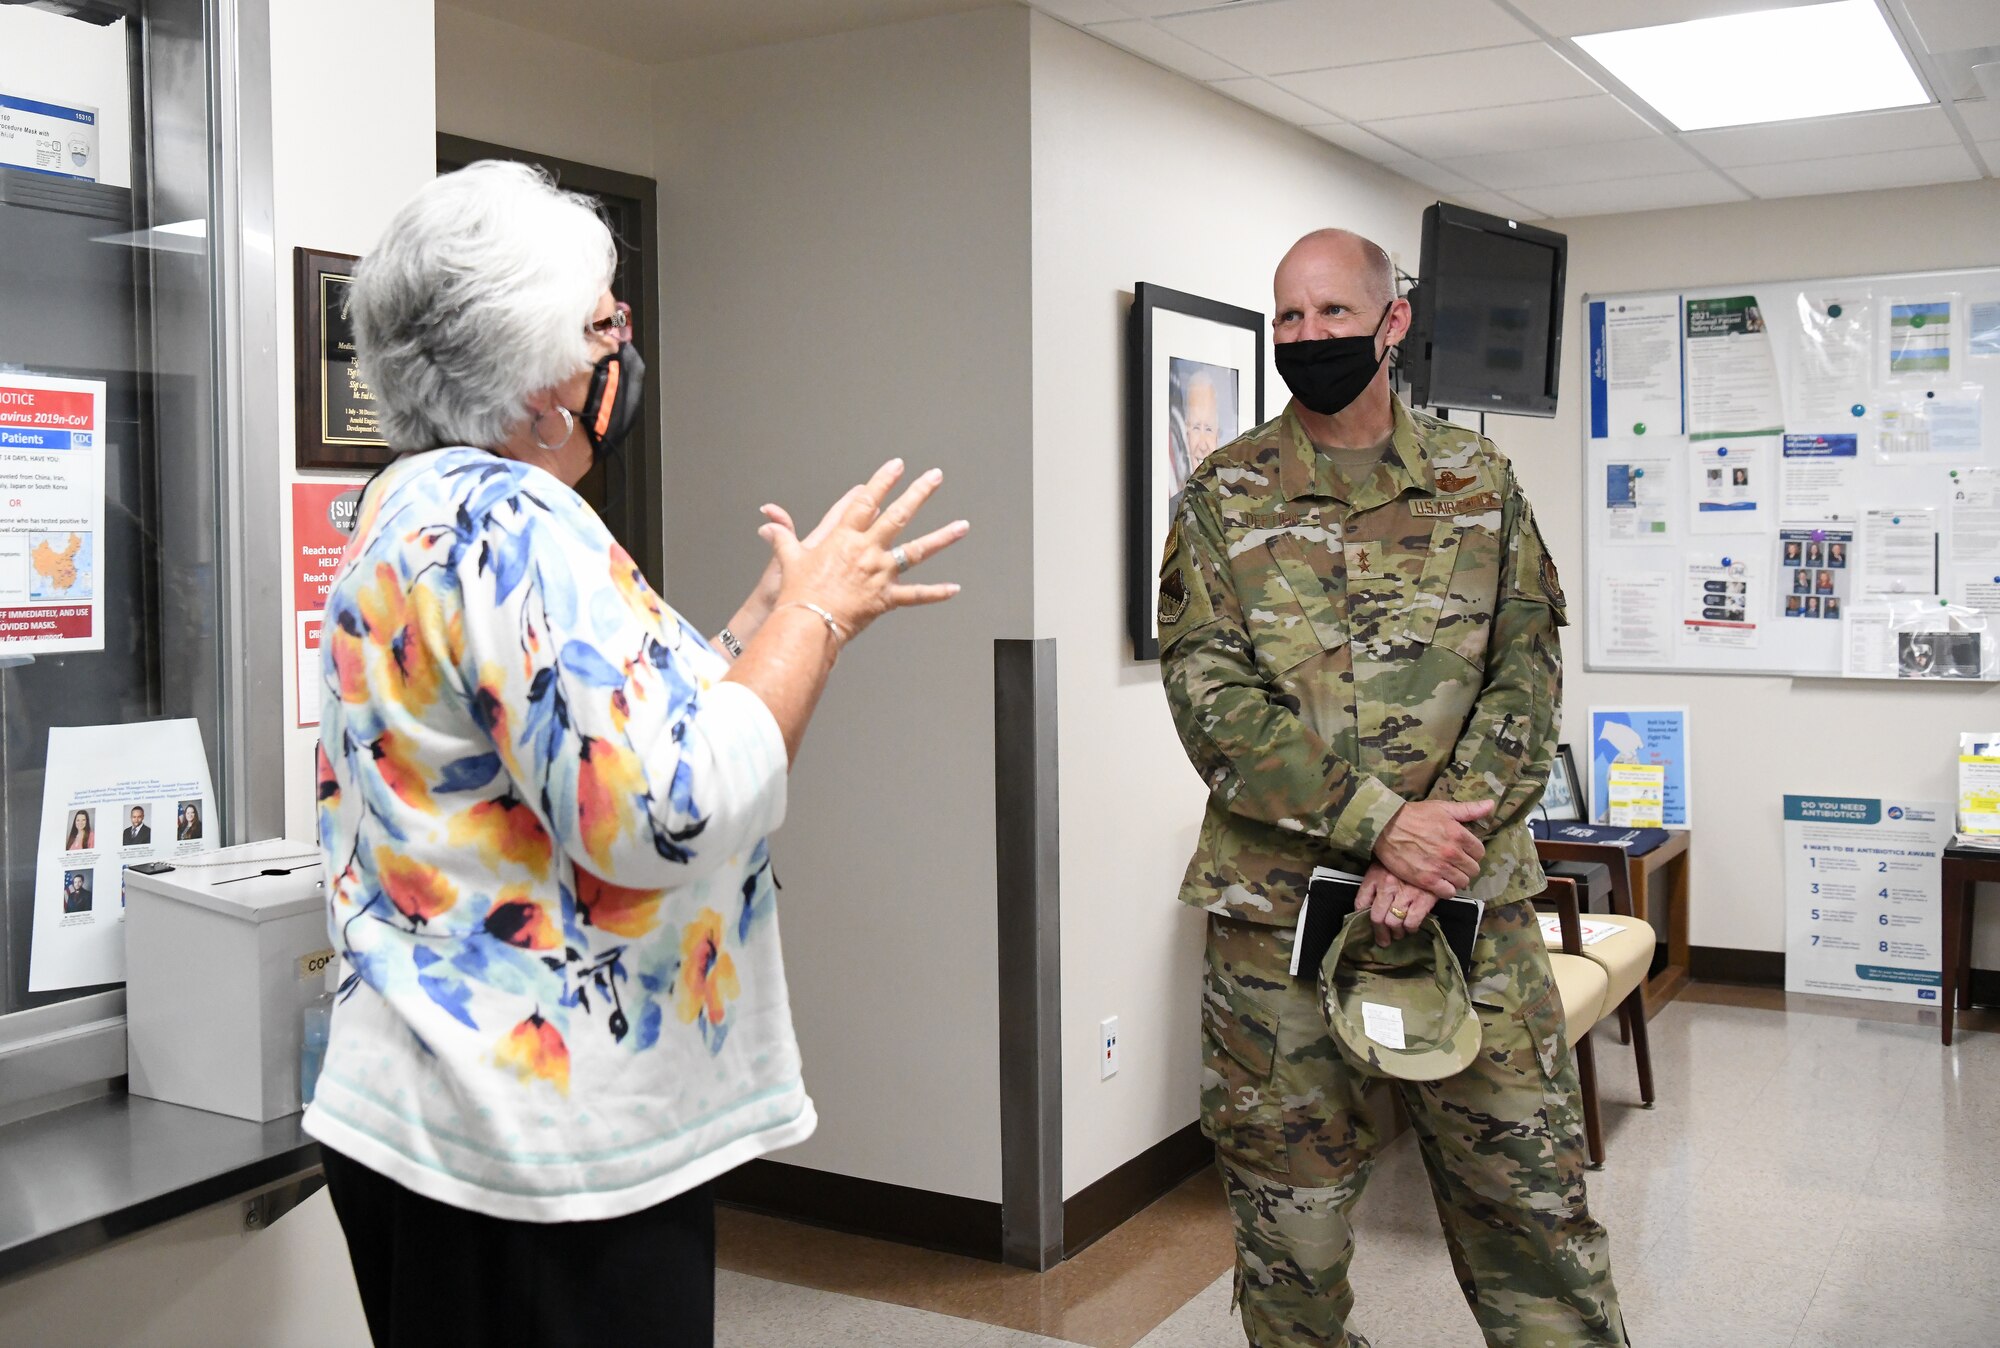 Judy Mohler, a health system specialist, speaks with Maj. Gen. Evan Dertien, commander, Air Force Test Center, during his visit to Arnold Air Force Base, oct. 14, 2021. (U.S. Air Force photo by Jill Pickett)